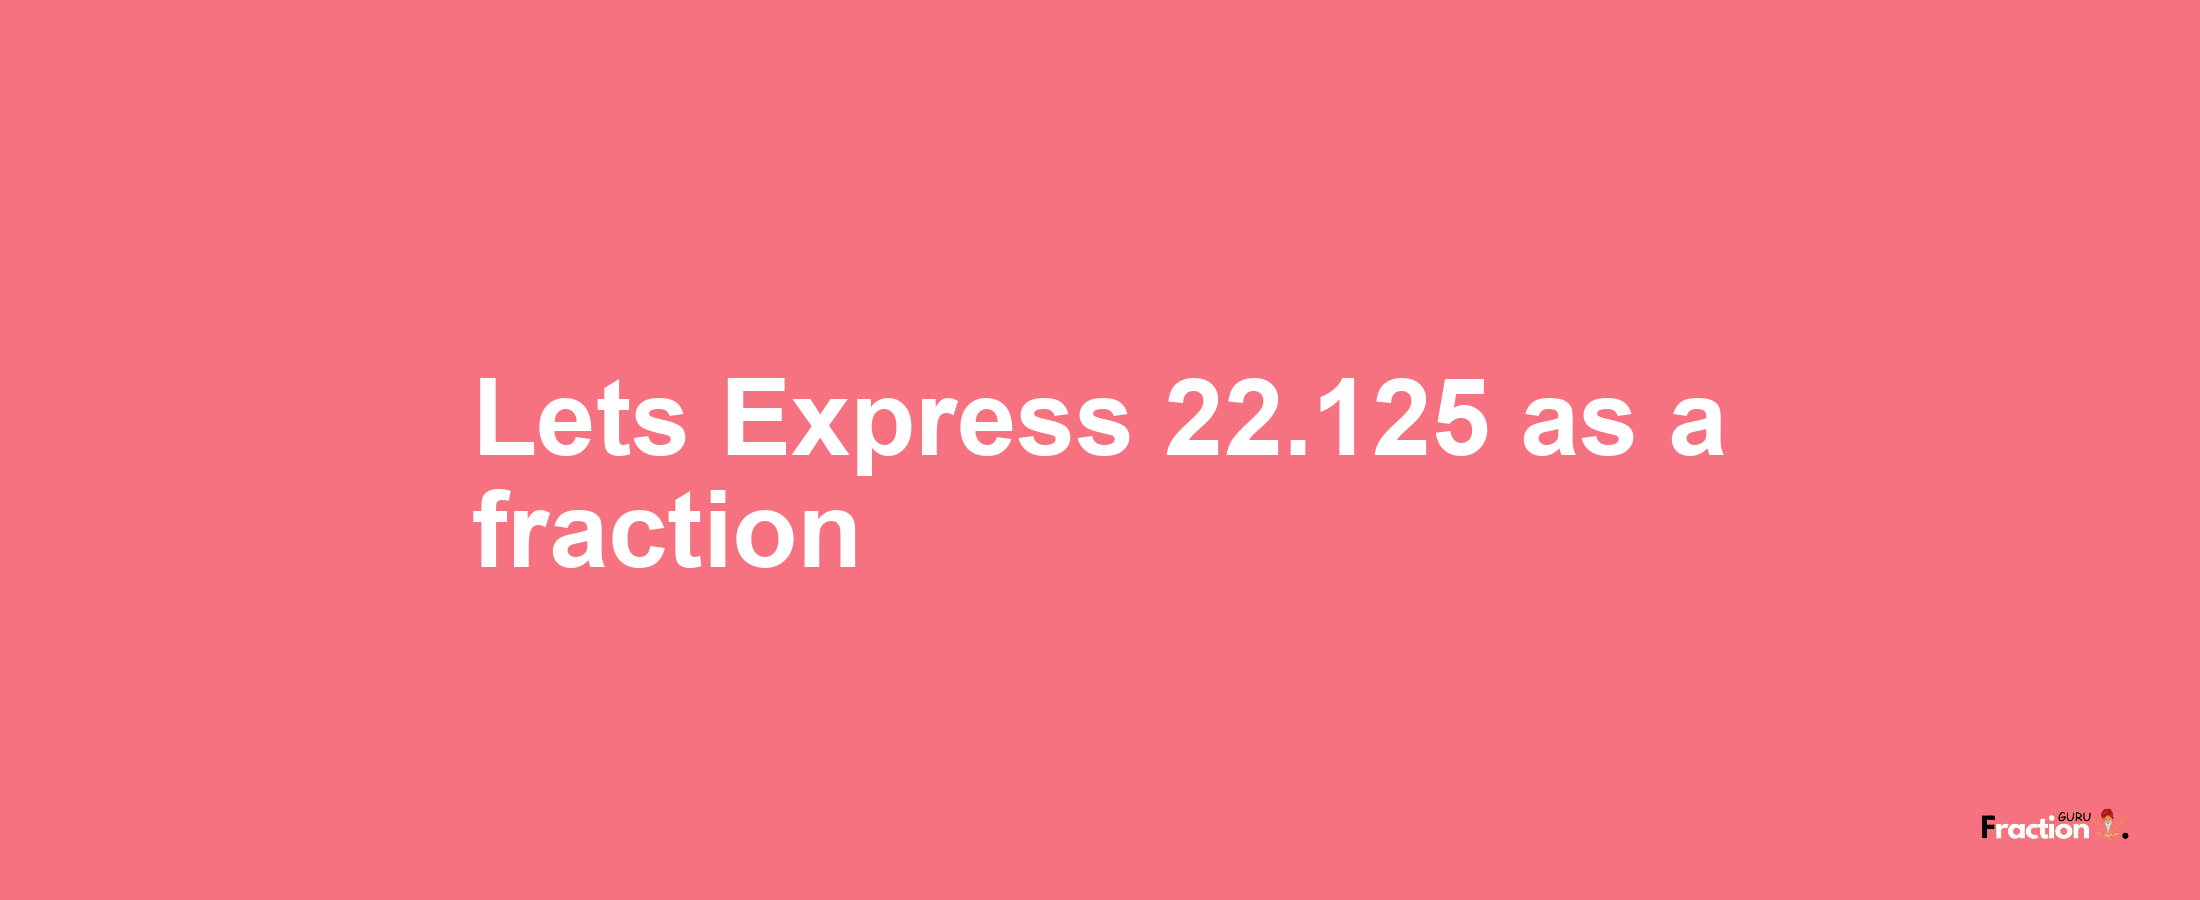 Lets Express 22.125 as afraction